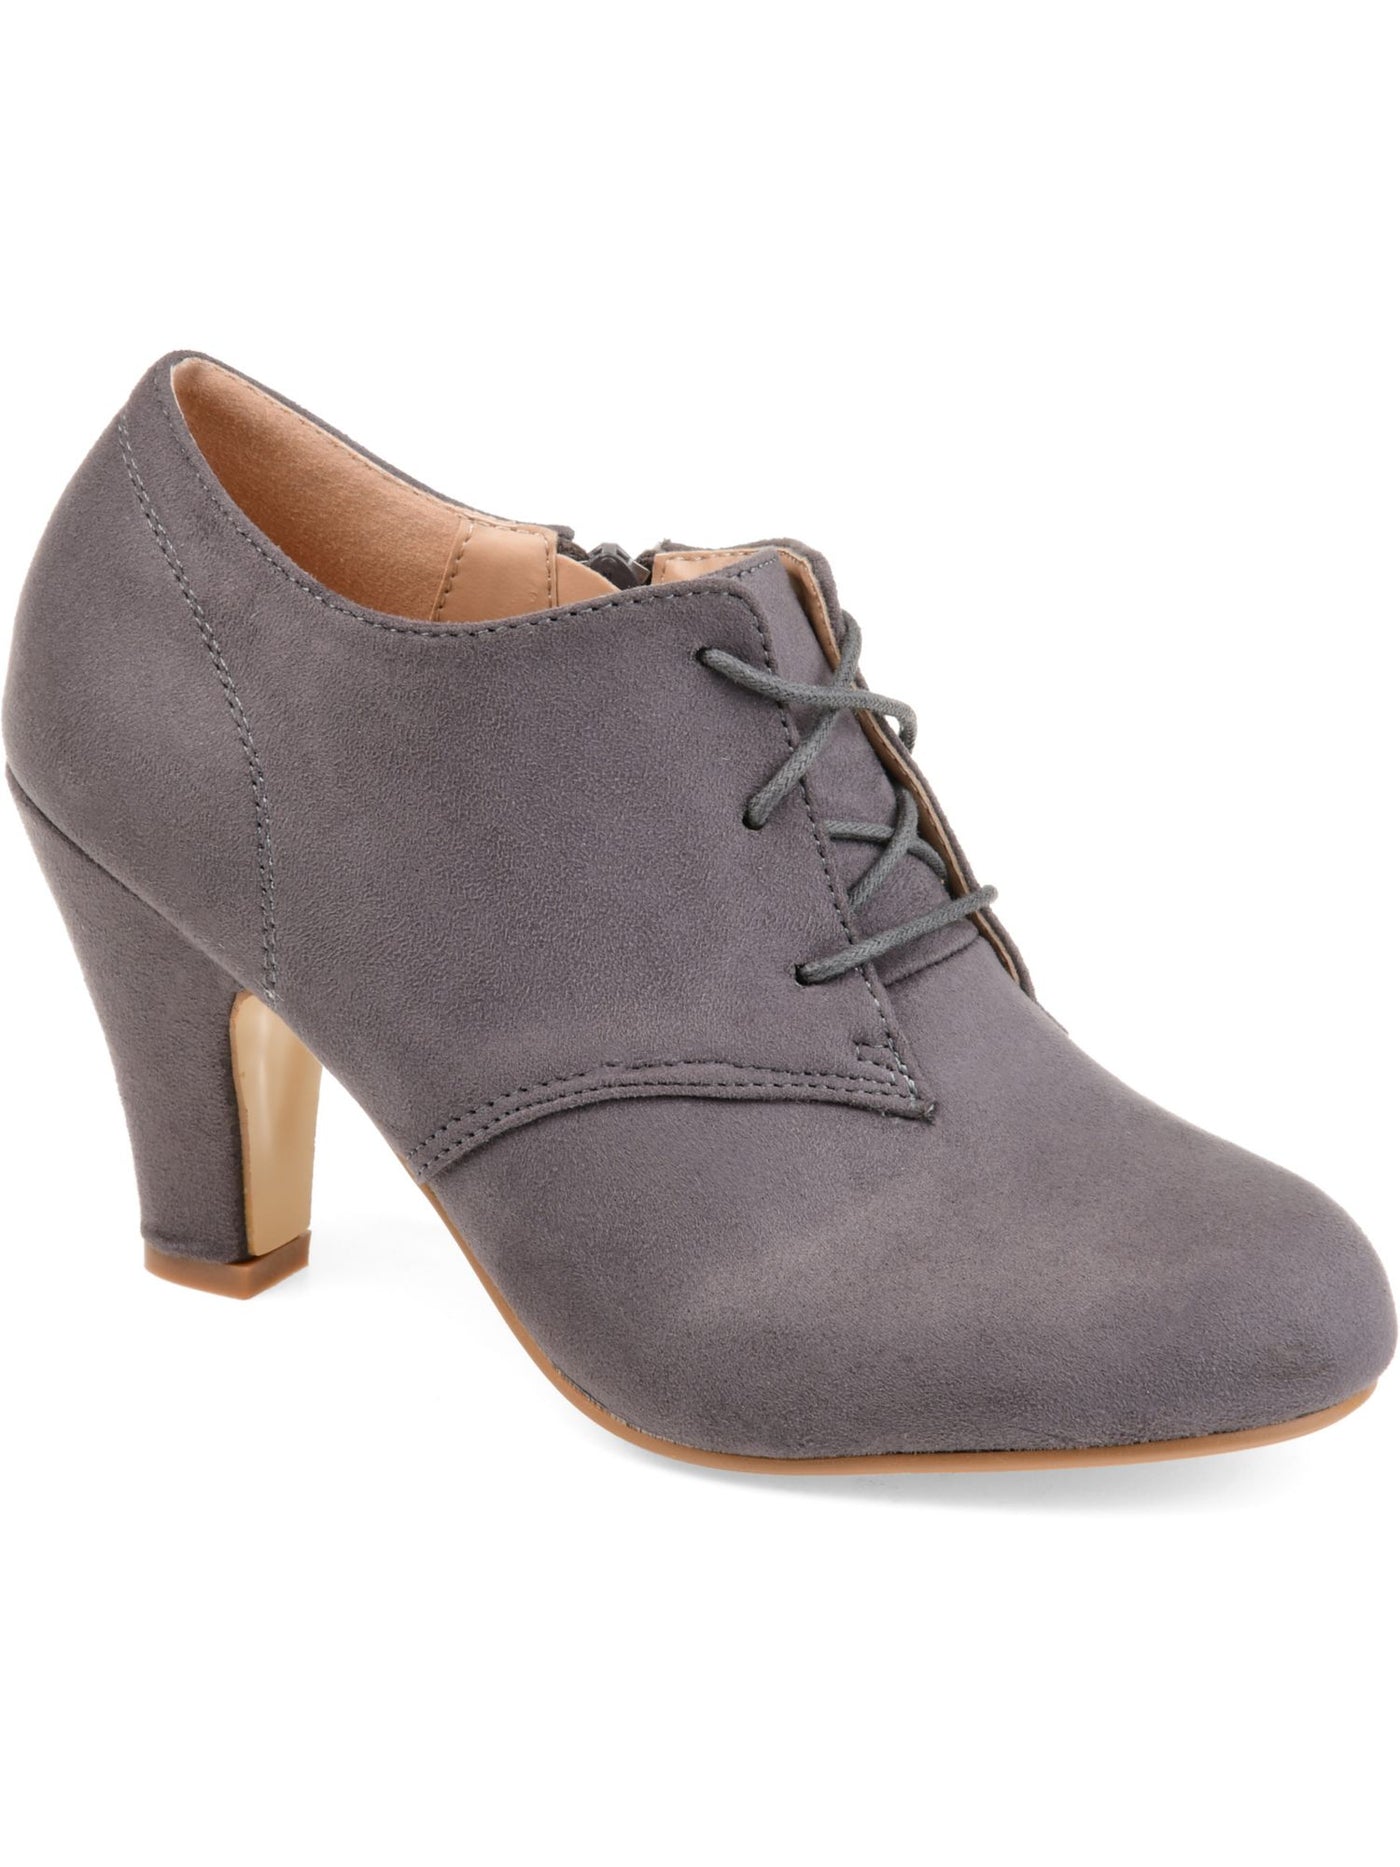 JOURNEE COLLECTION Womens Gray Lace Up Padded Leona Round Toe Block Heel Zip-Up Booties 7 W